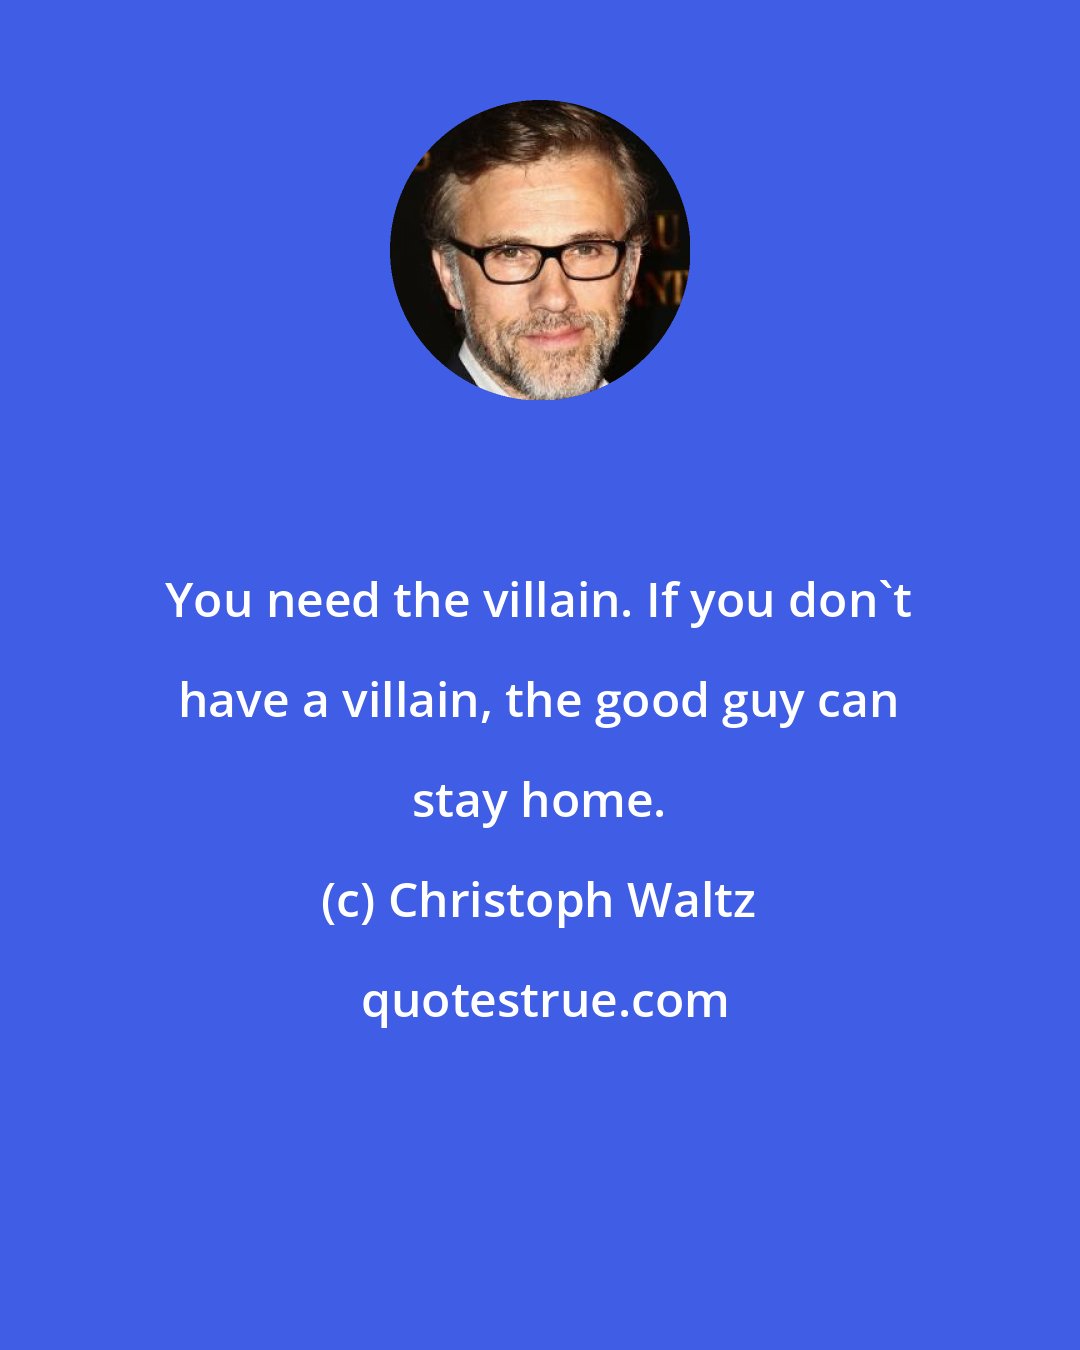 Christoph Waltz: You need the villain. If you don't have a villain, the good guy can stay home.